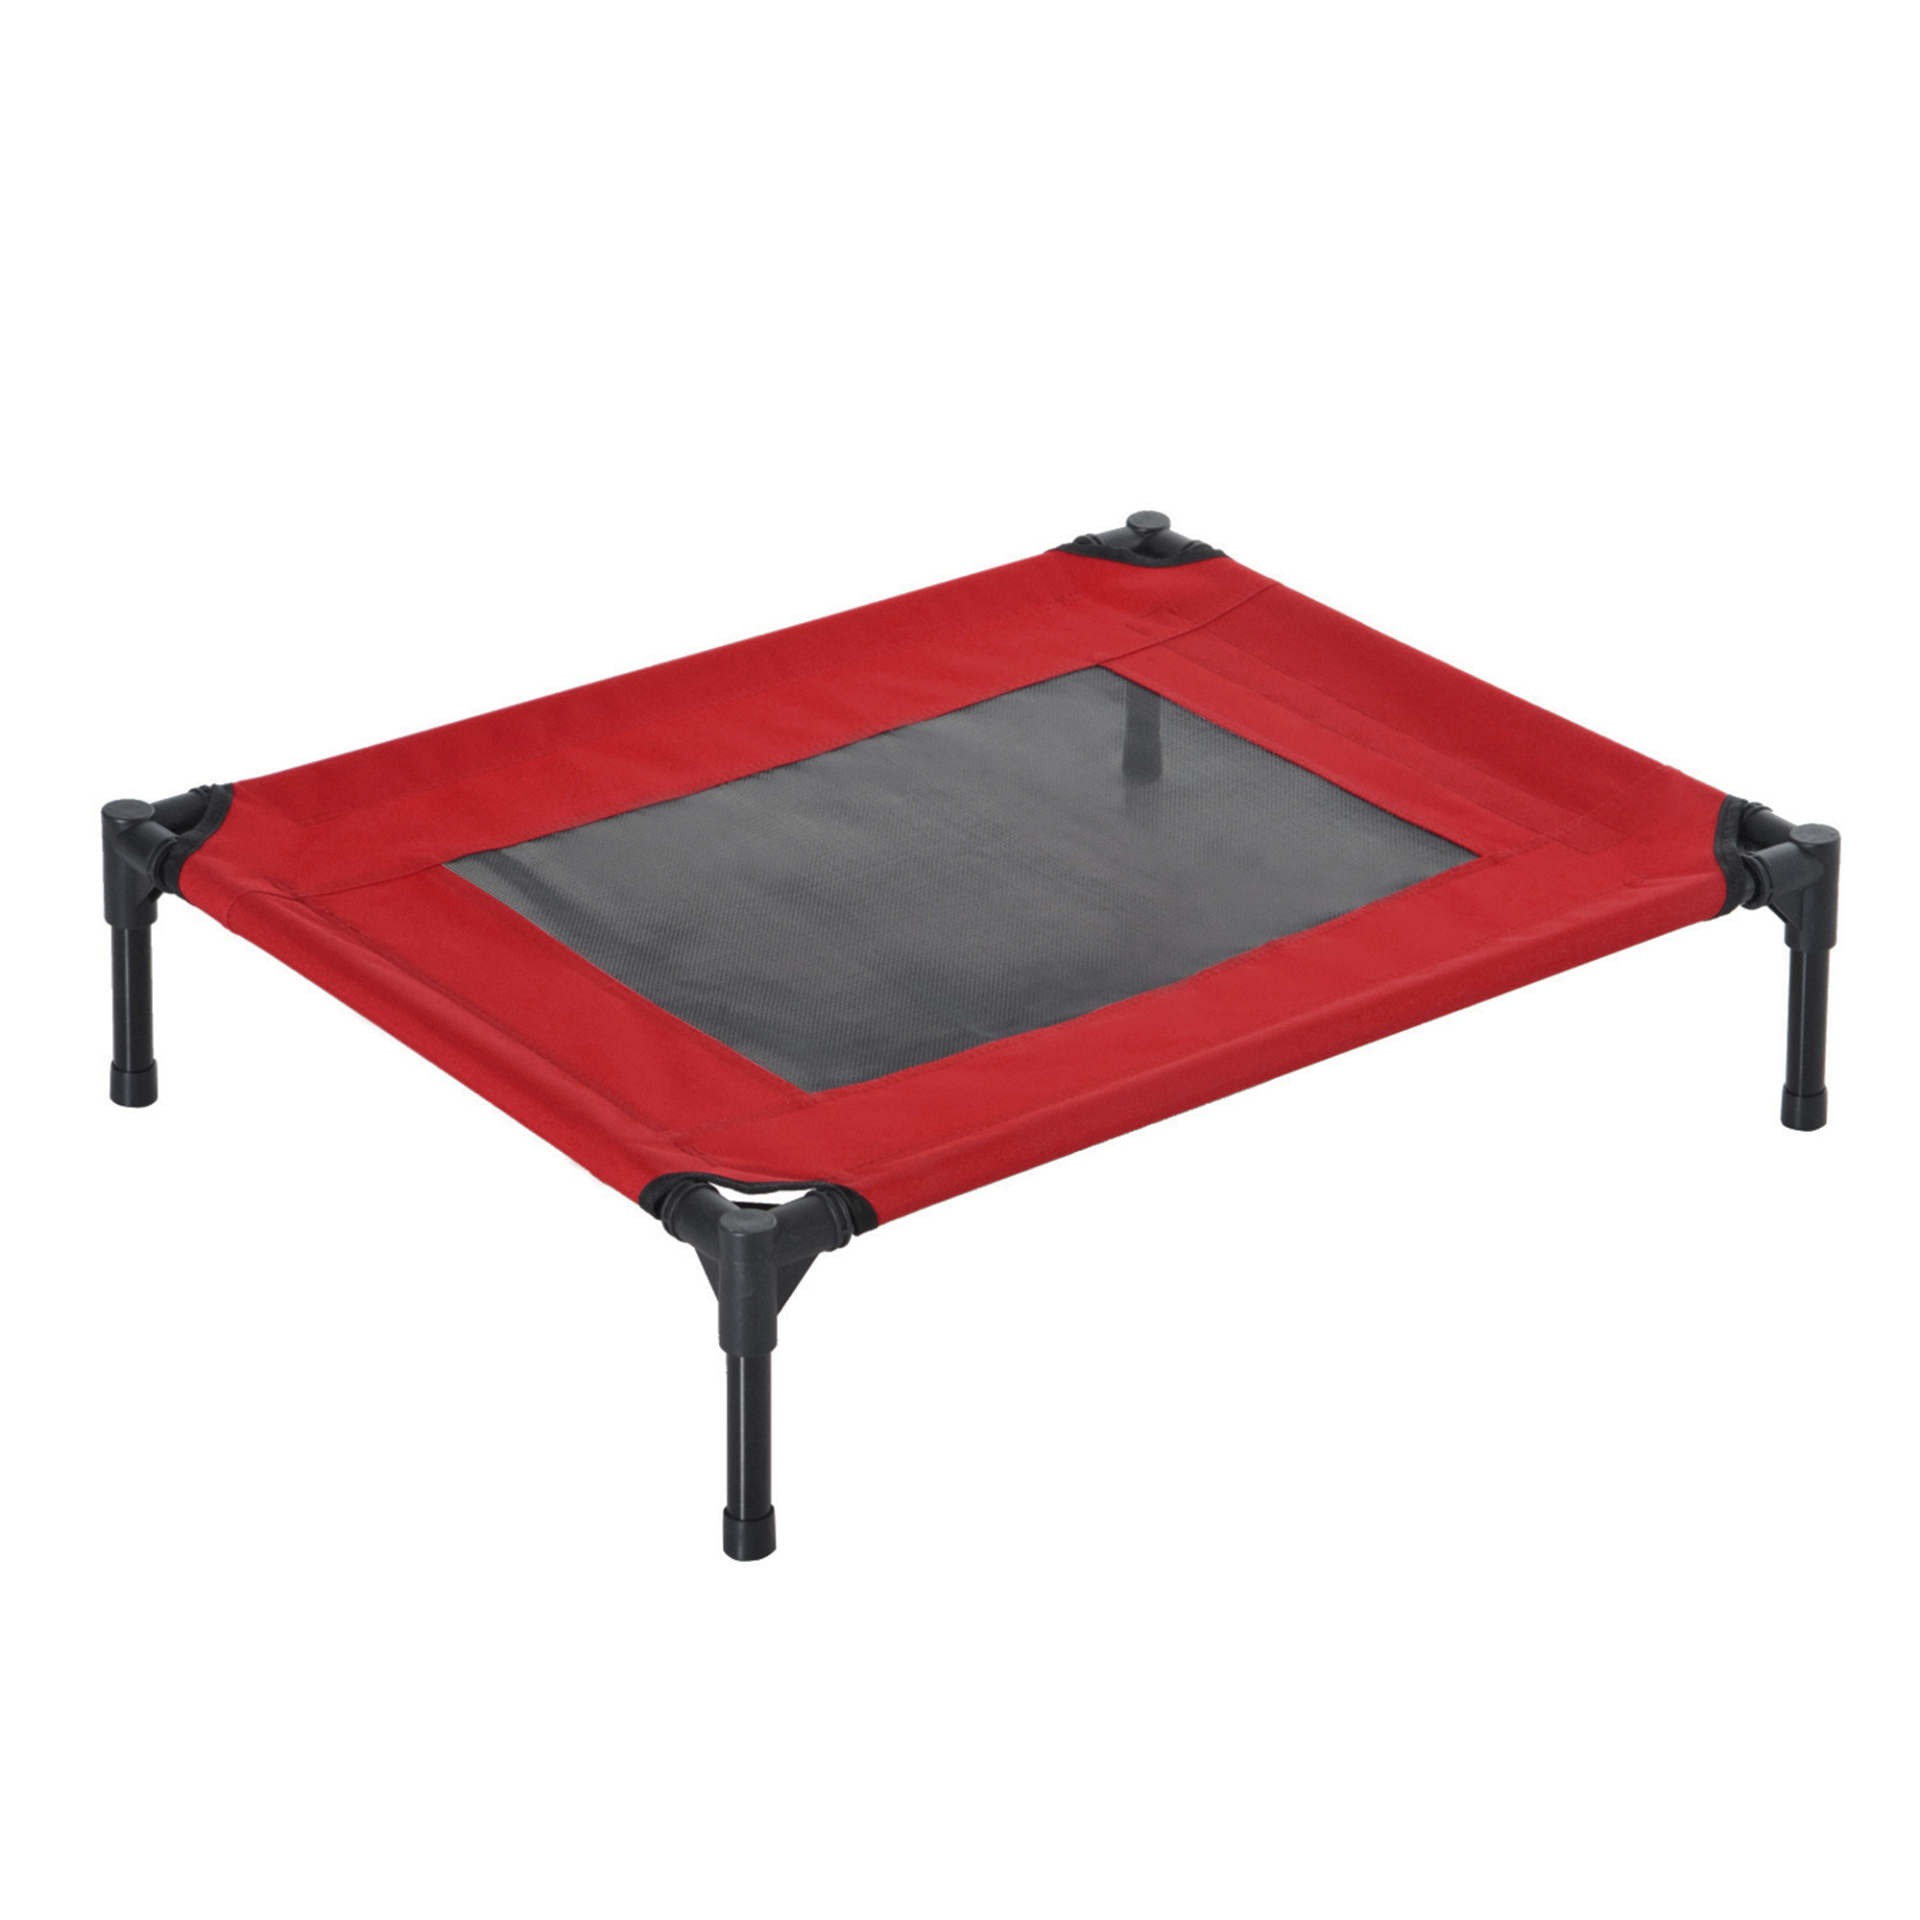 PawHut Raised Dog Bed Cat Elevated Lifted Portable Camping w/ Metal Frame Black and Red (Medium) - Comfortable and Convenient Bed for Your Pet Sleeping Mats and Airbeds Cosy Camping Co. Red  